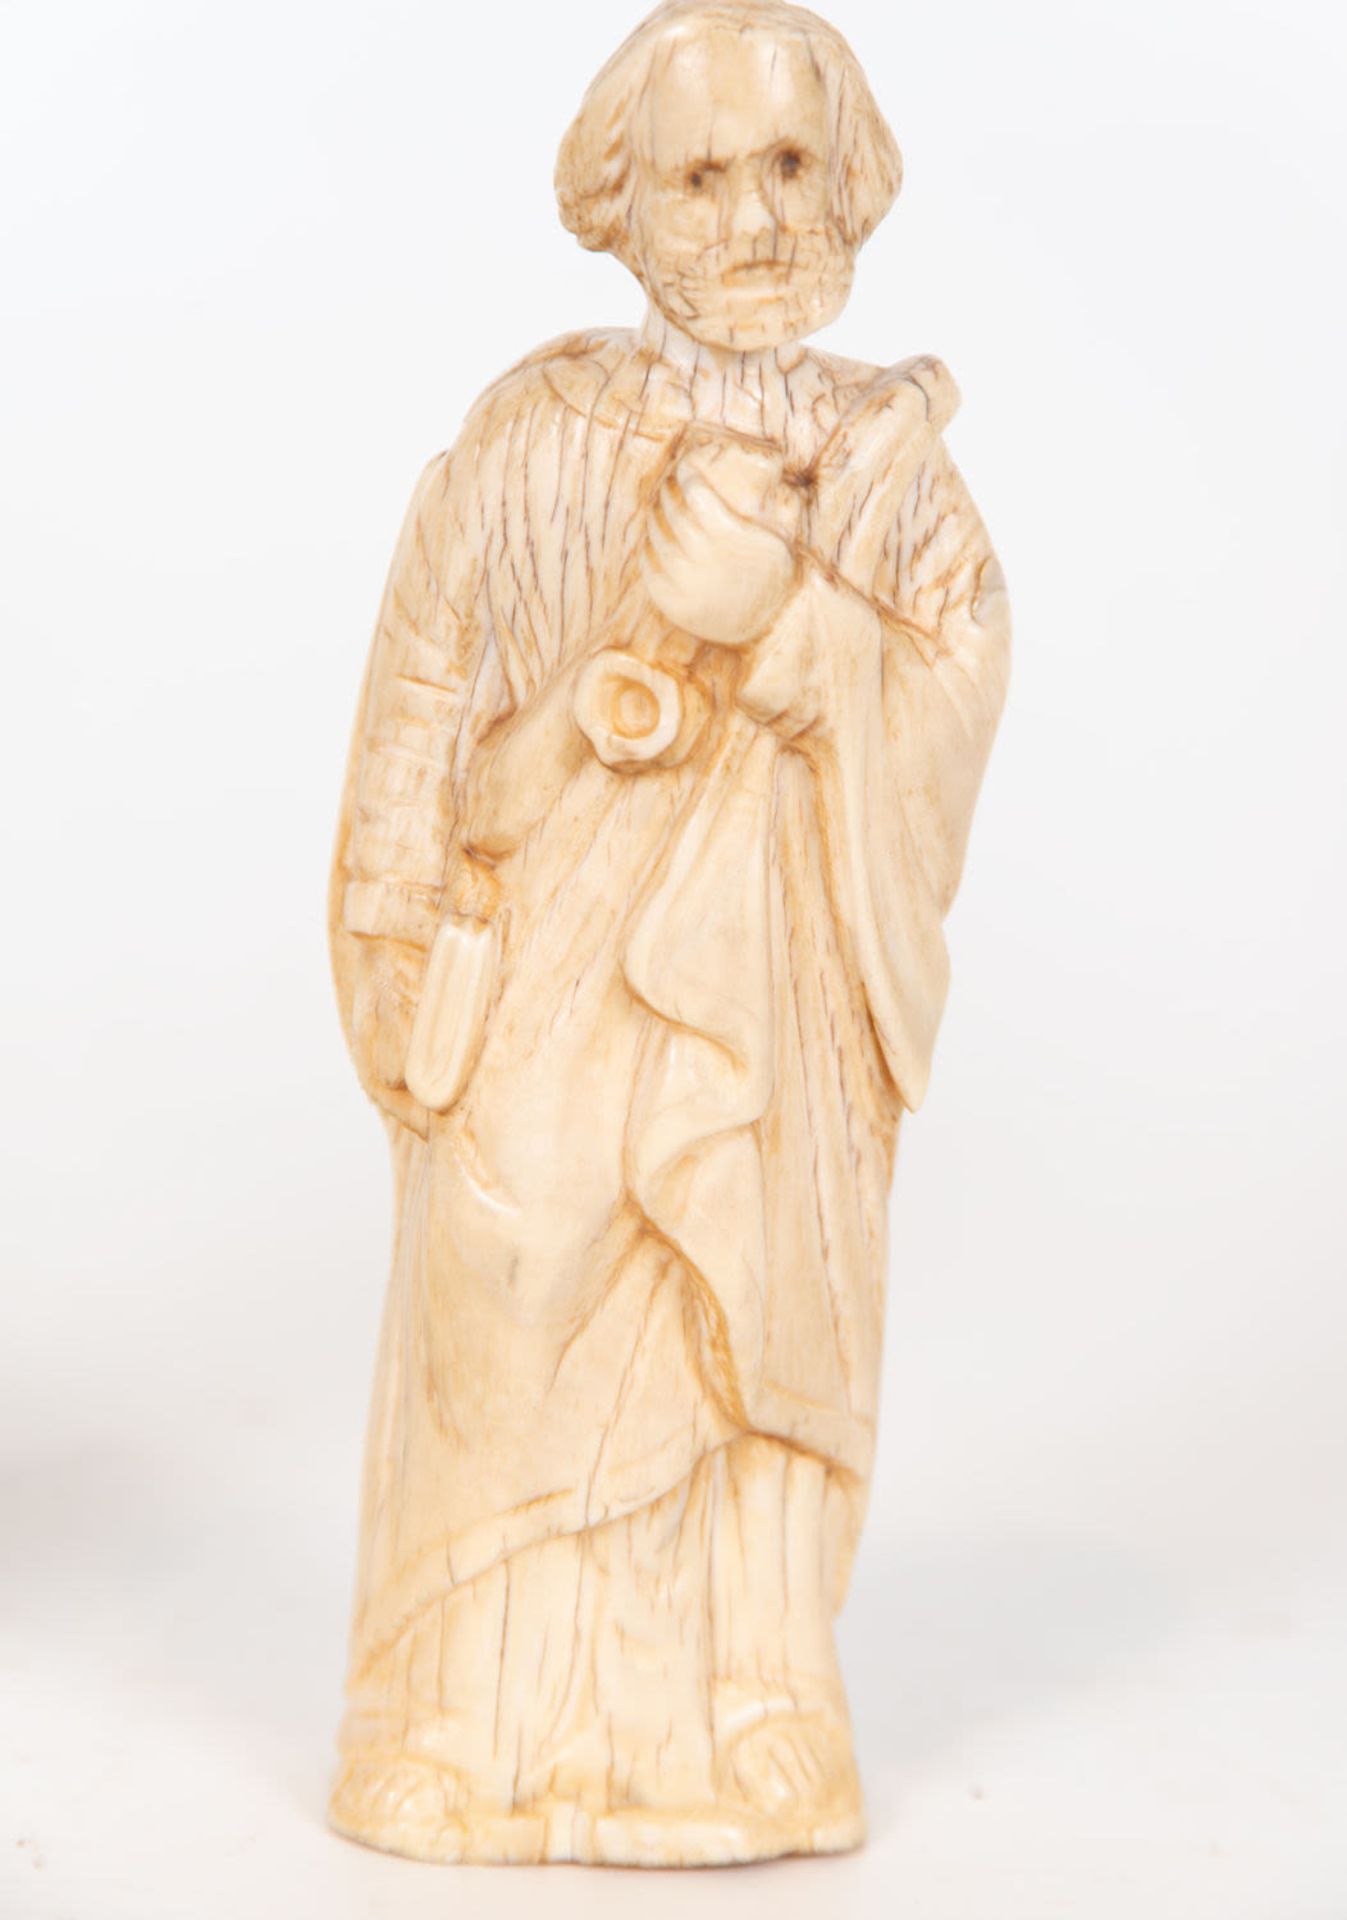 Saint Peter and Saint Paul in Ivory, Central European School, 17th century - Image 6 of 8